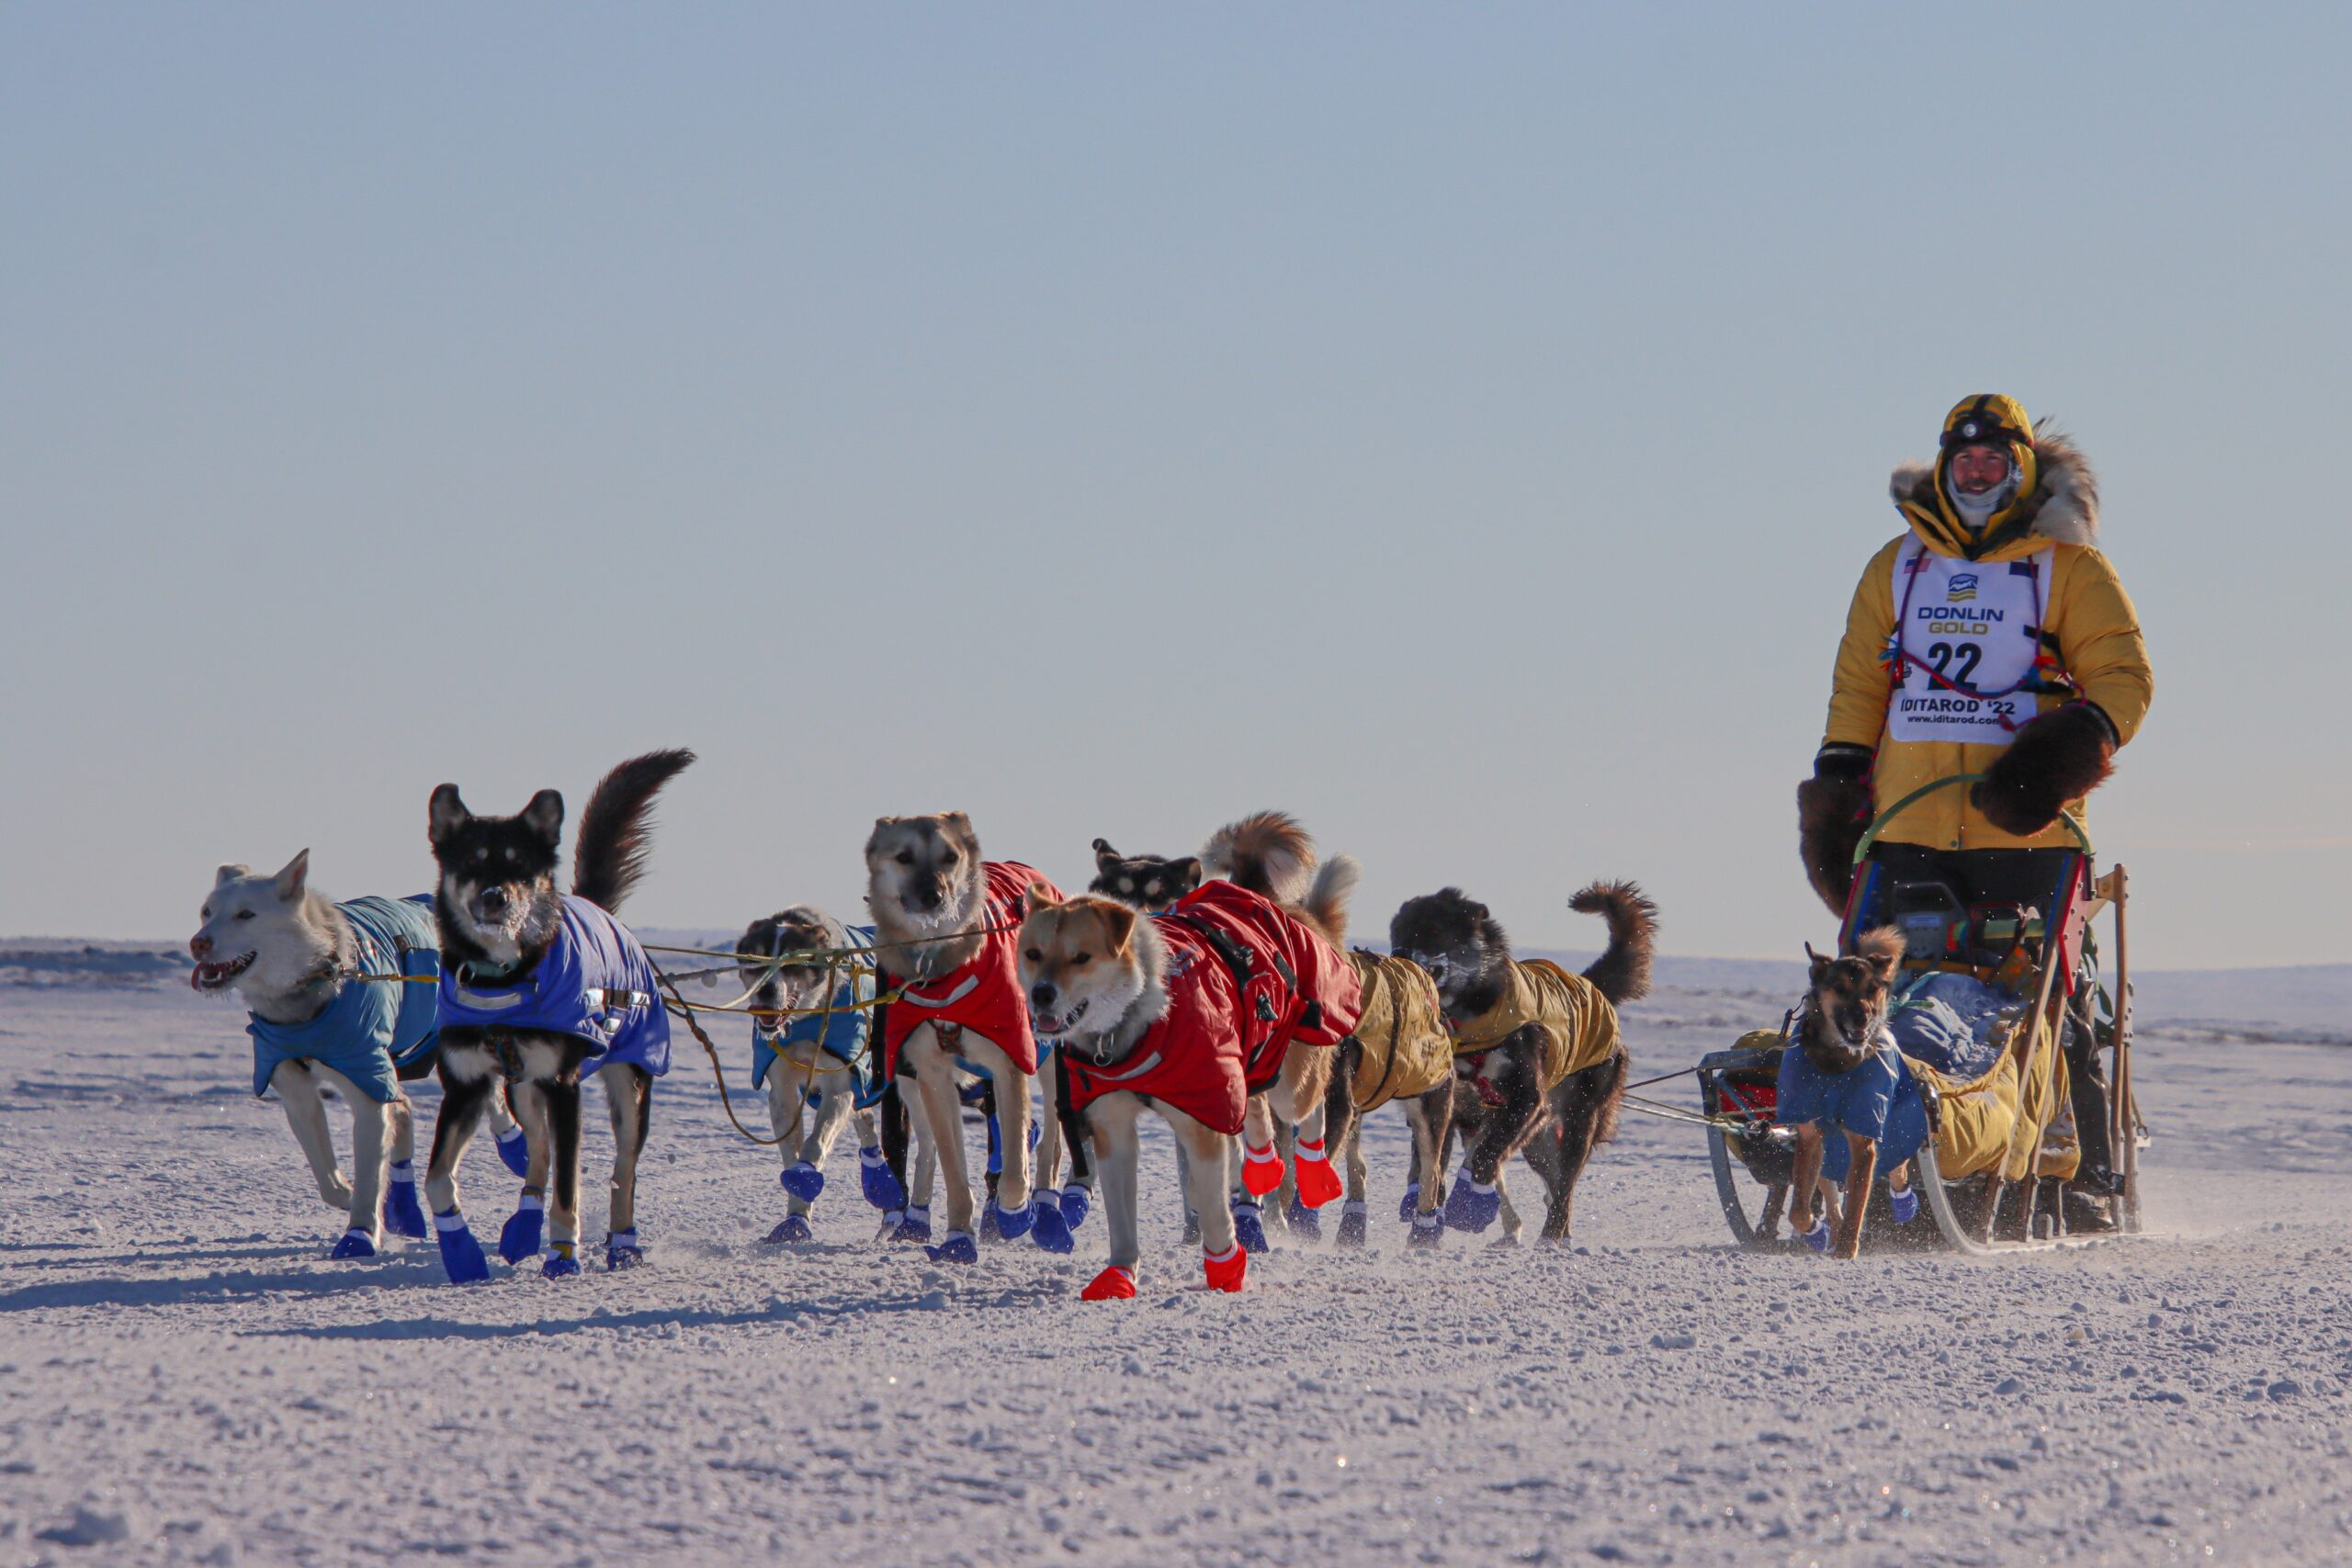 A musher in the snow with a yellow parka drives a team of dogs